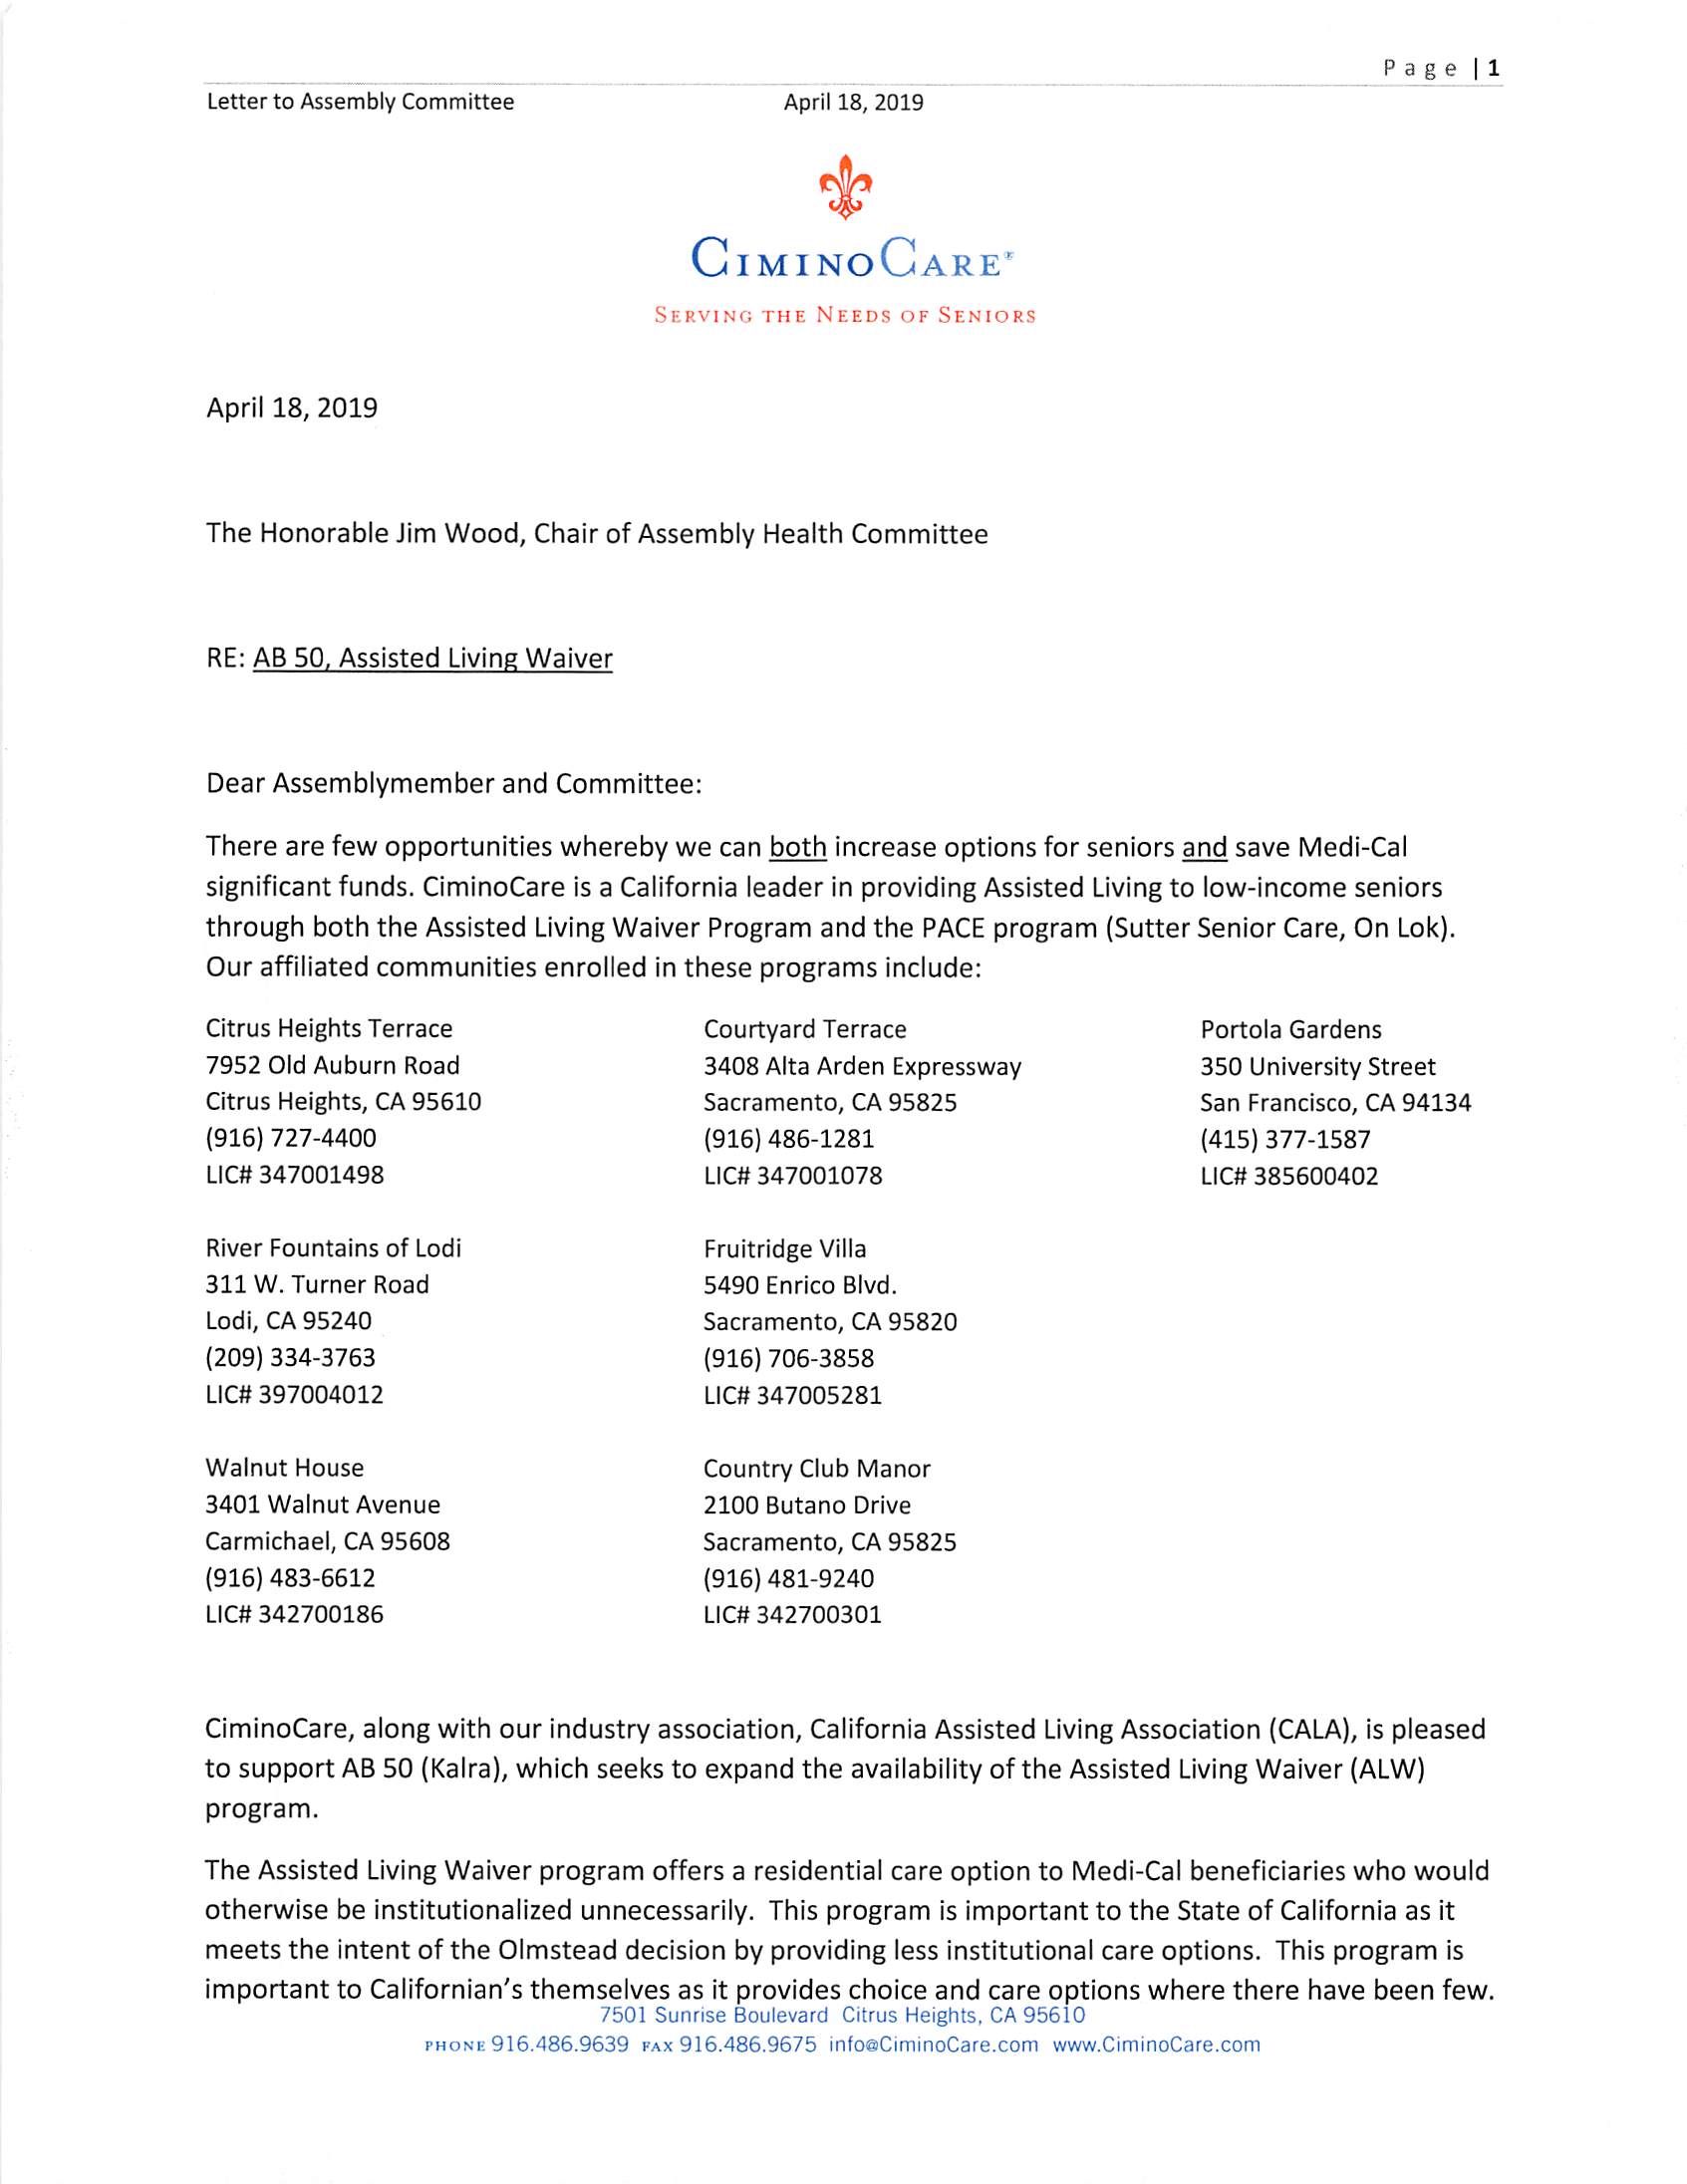 CiminoCare Letter to Assembly Committee